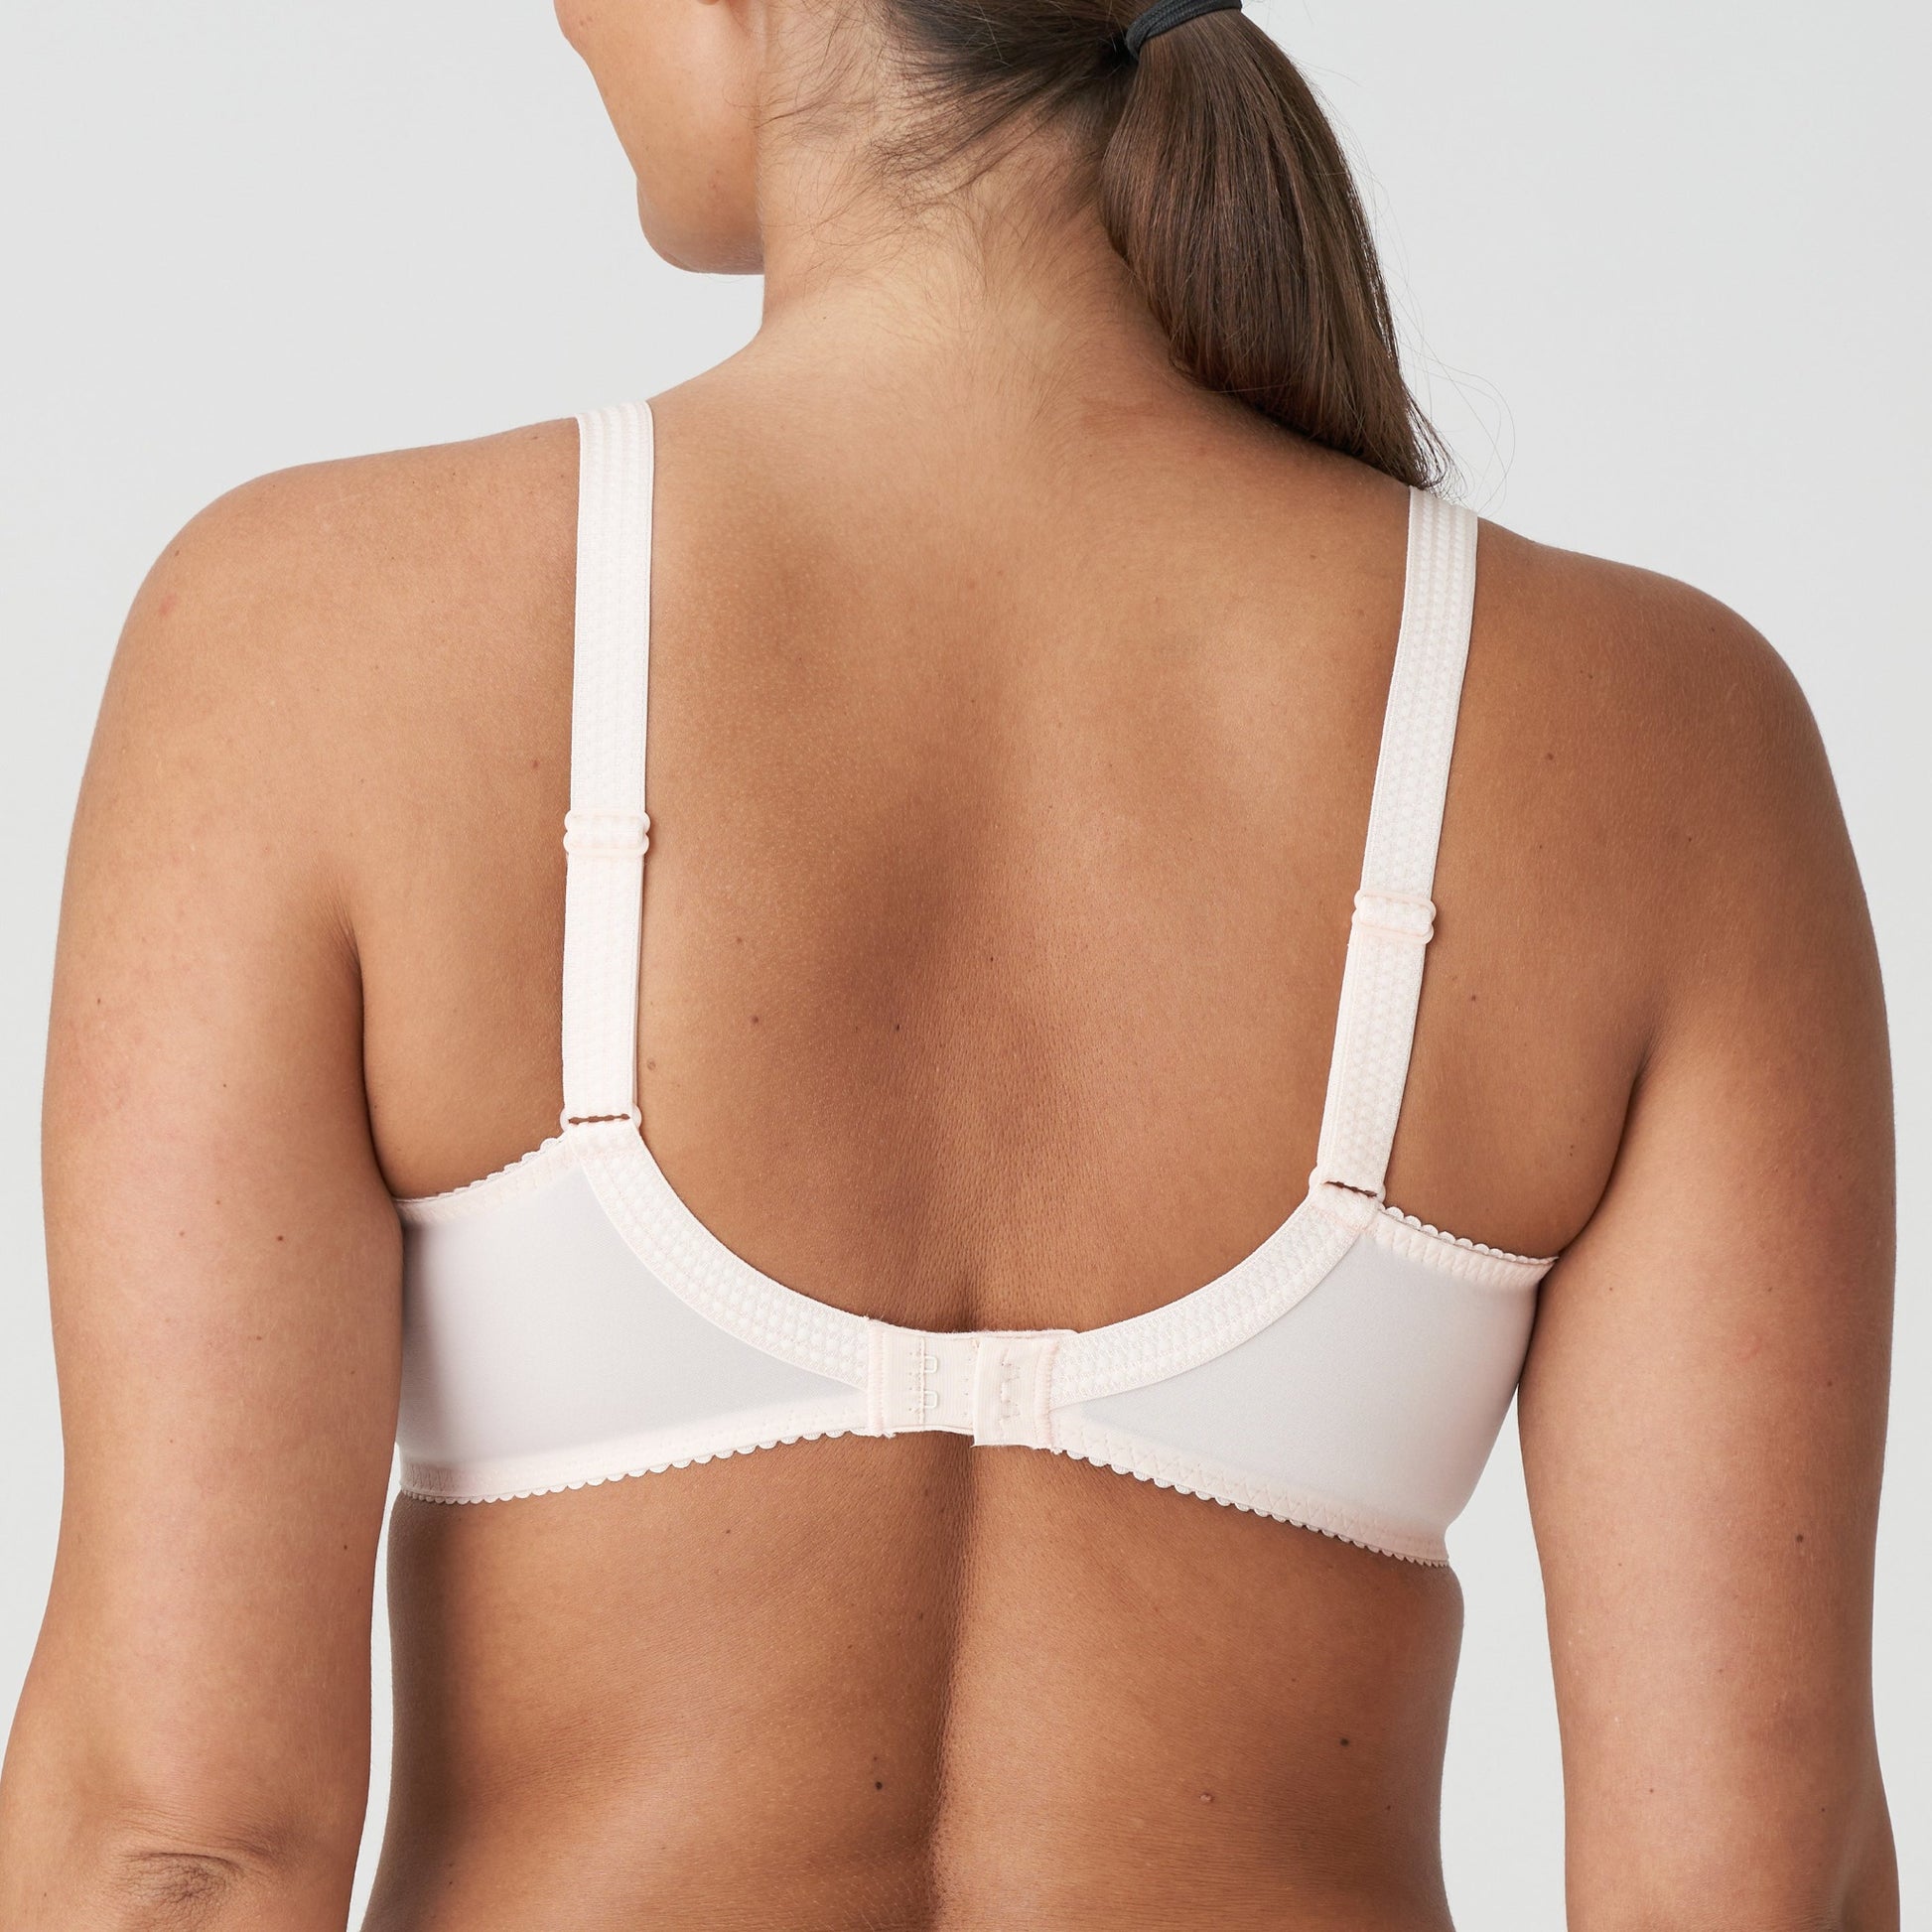 Back view of a woman wearing the DD+ Montara Full Cup Bra in Crystal Pink by Primadonna.